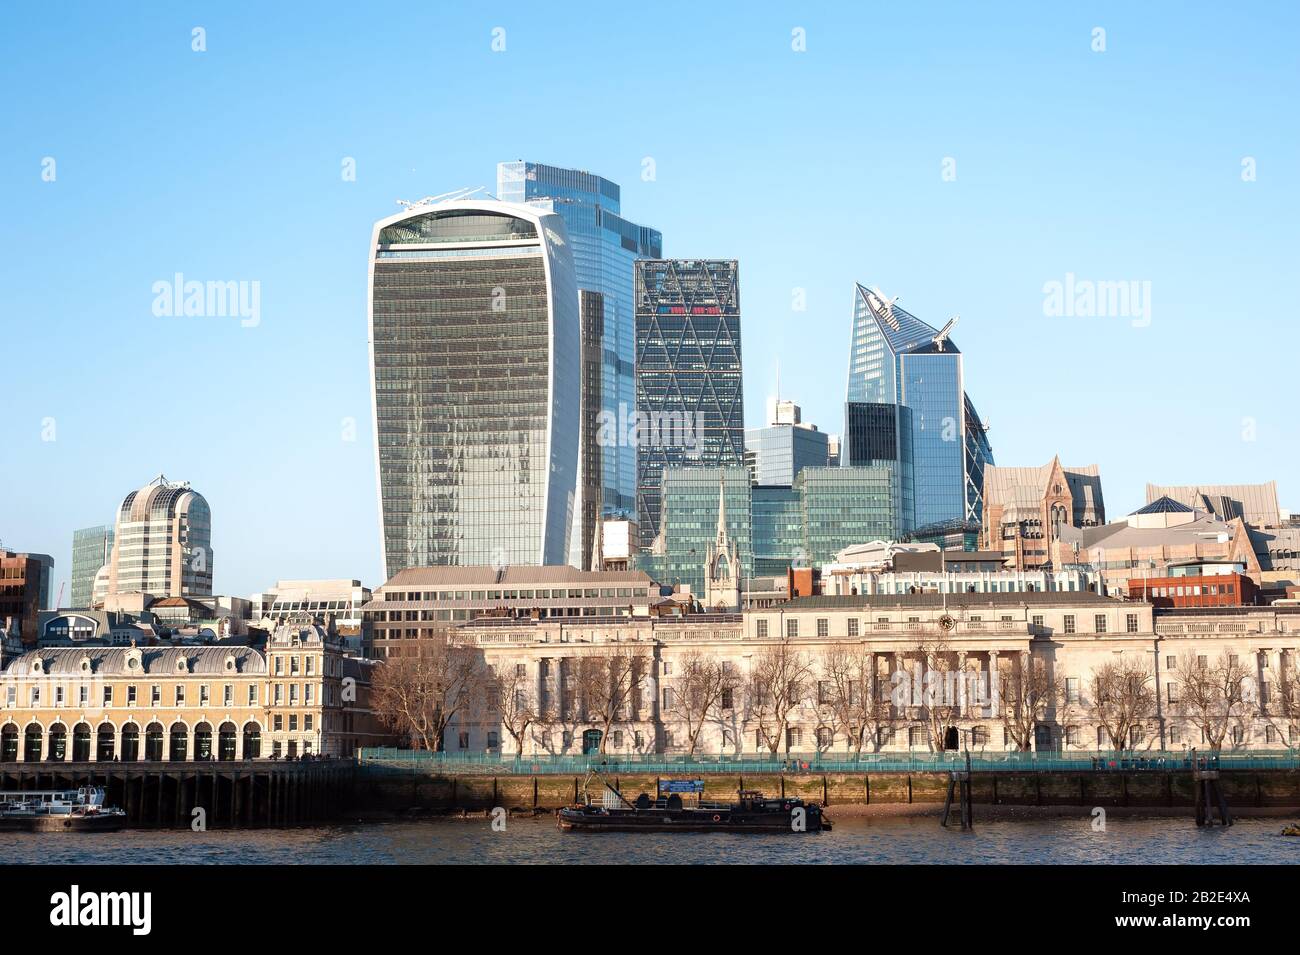 Custom House in the foreground overlooked by the skyscrapers of the City of London Stock Photo